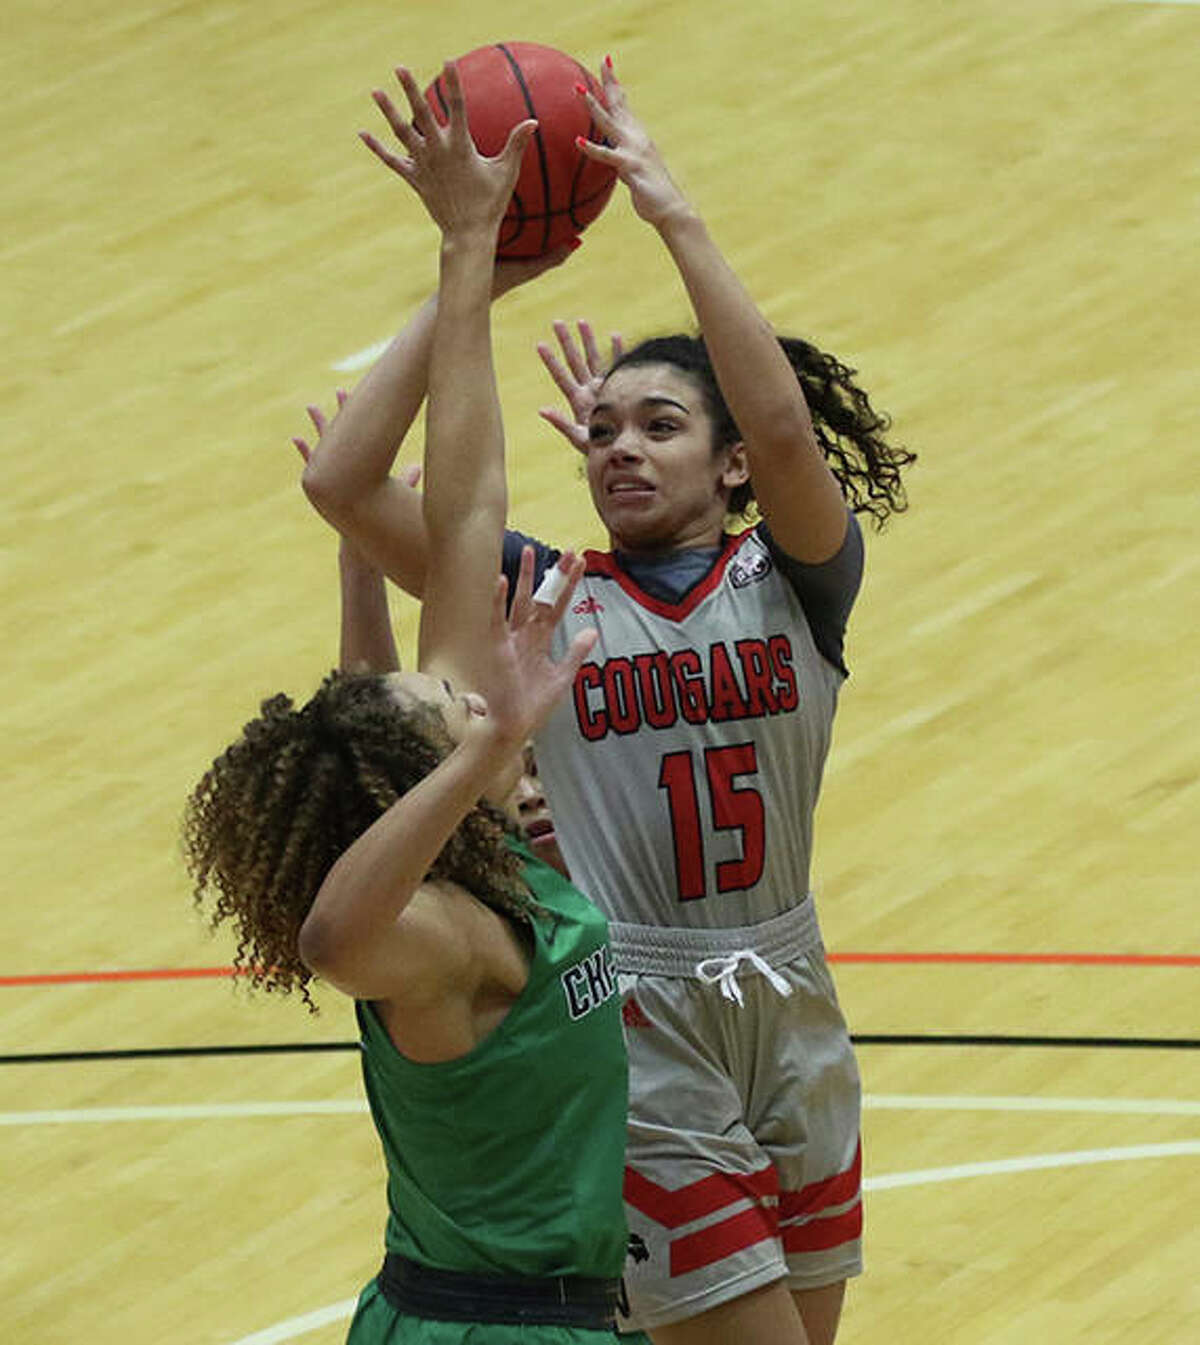 SIUE’s Masyn McWilliams (15) pulls up and shoot over a Chicago State defender in the lane Monday at First Community Arena in Edwardsville.